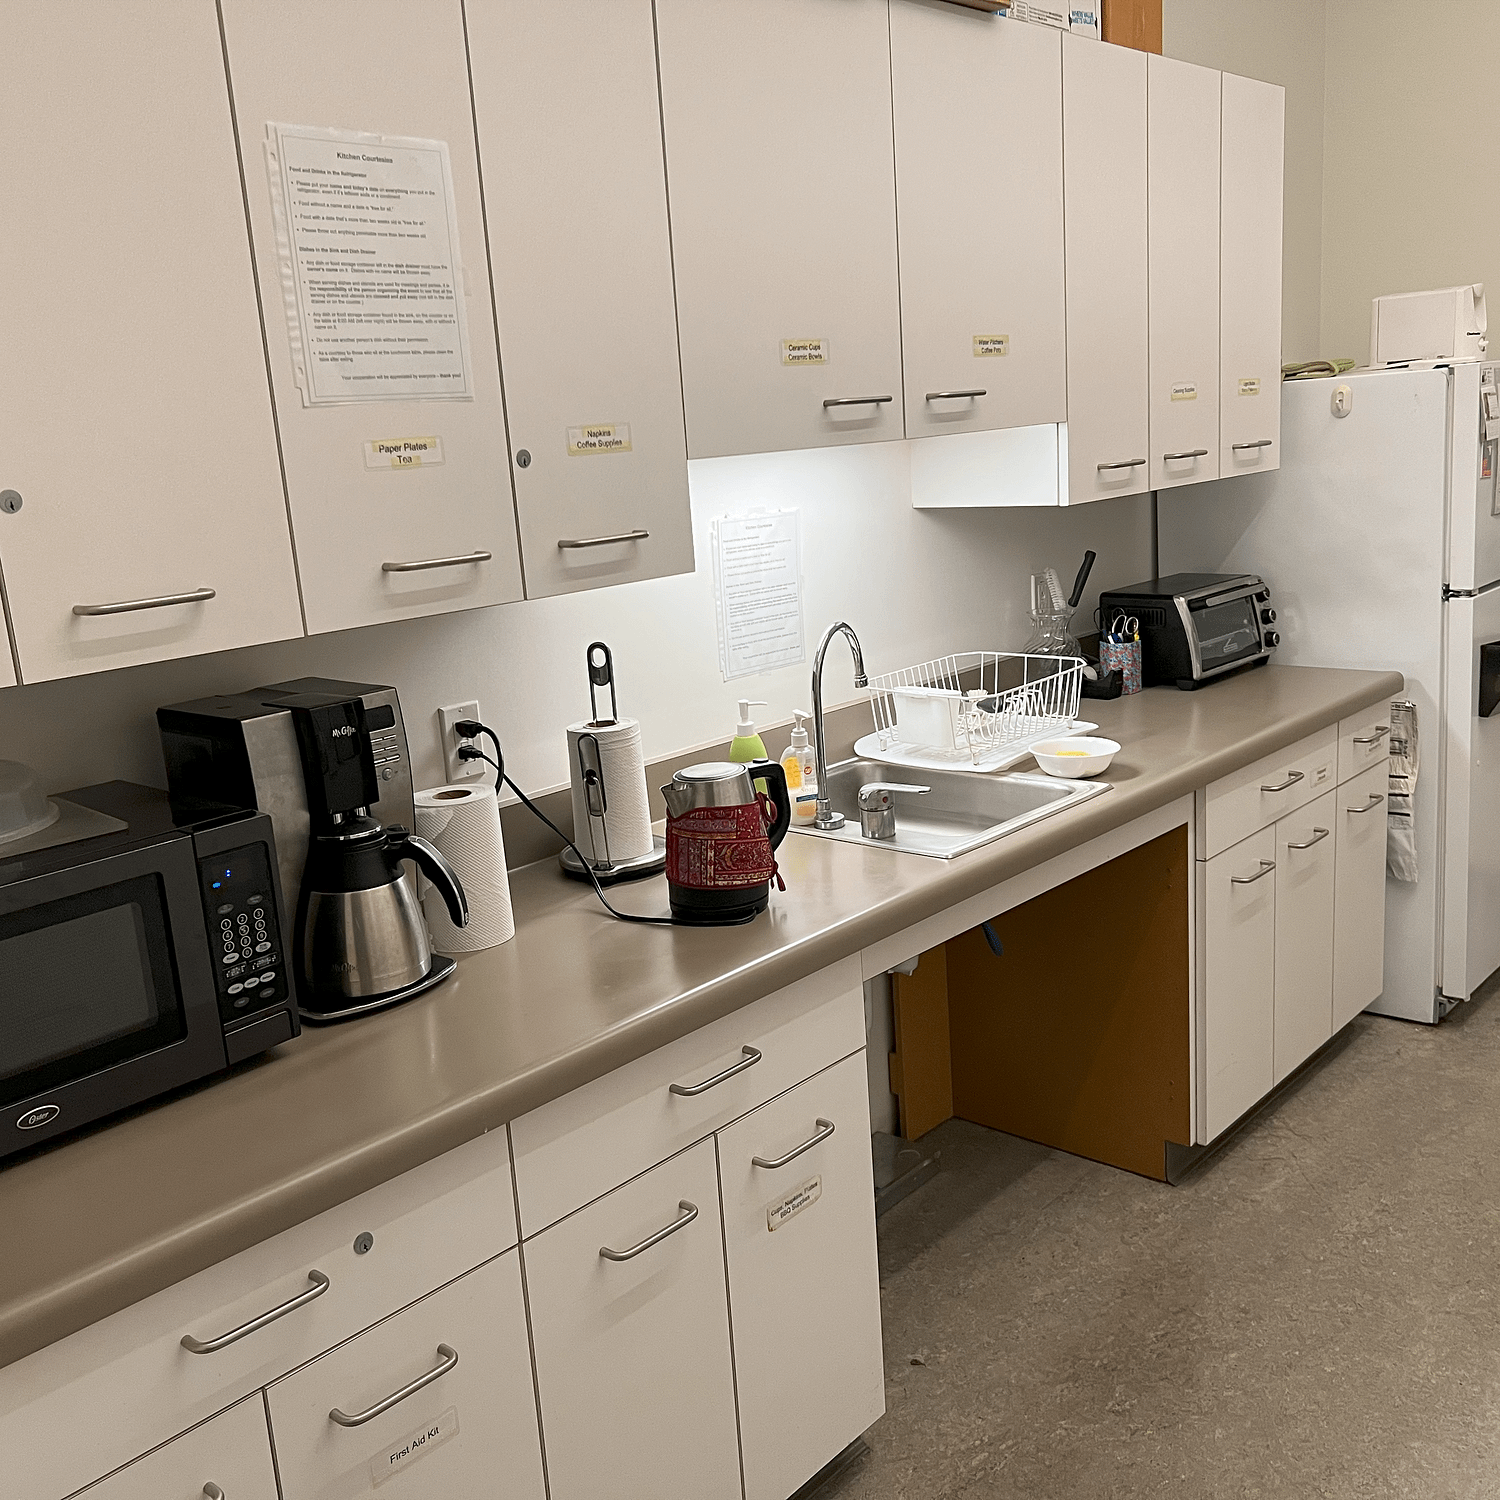 WID's office kitchen, with cabinets, a microwave, coffee maker and electric tea kettle, toaster oven, full size refrigerator, and a kitchen sink with open space underneath the sink to allow a wheelchair user to use the sink comfortably